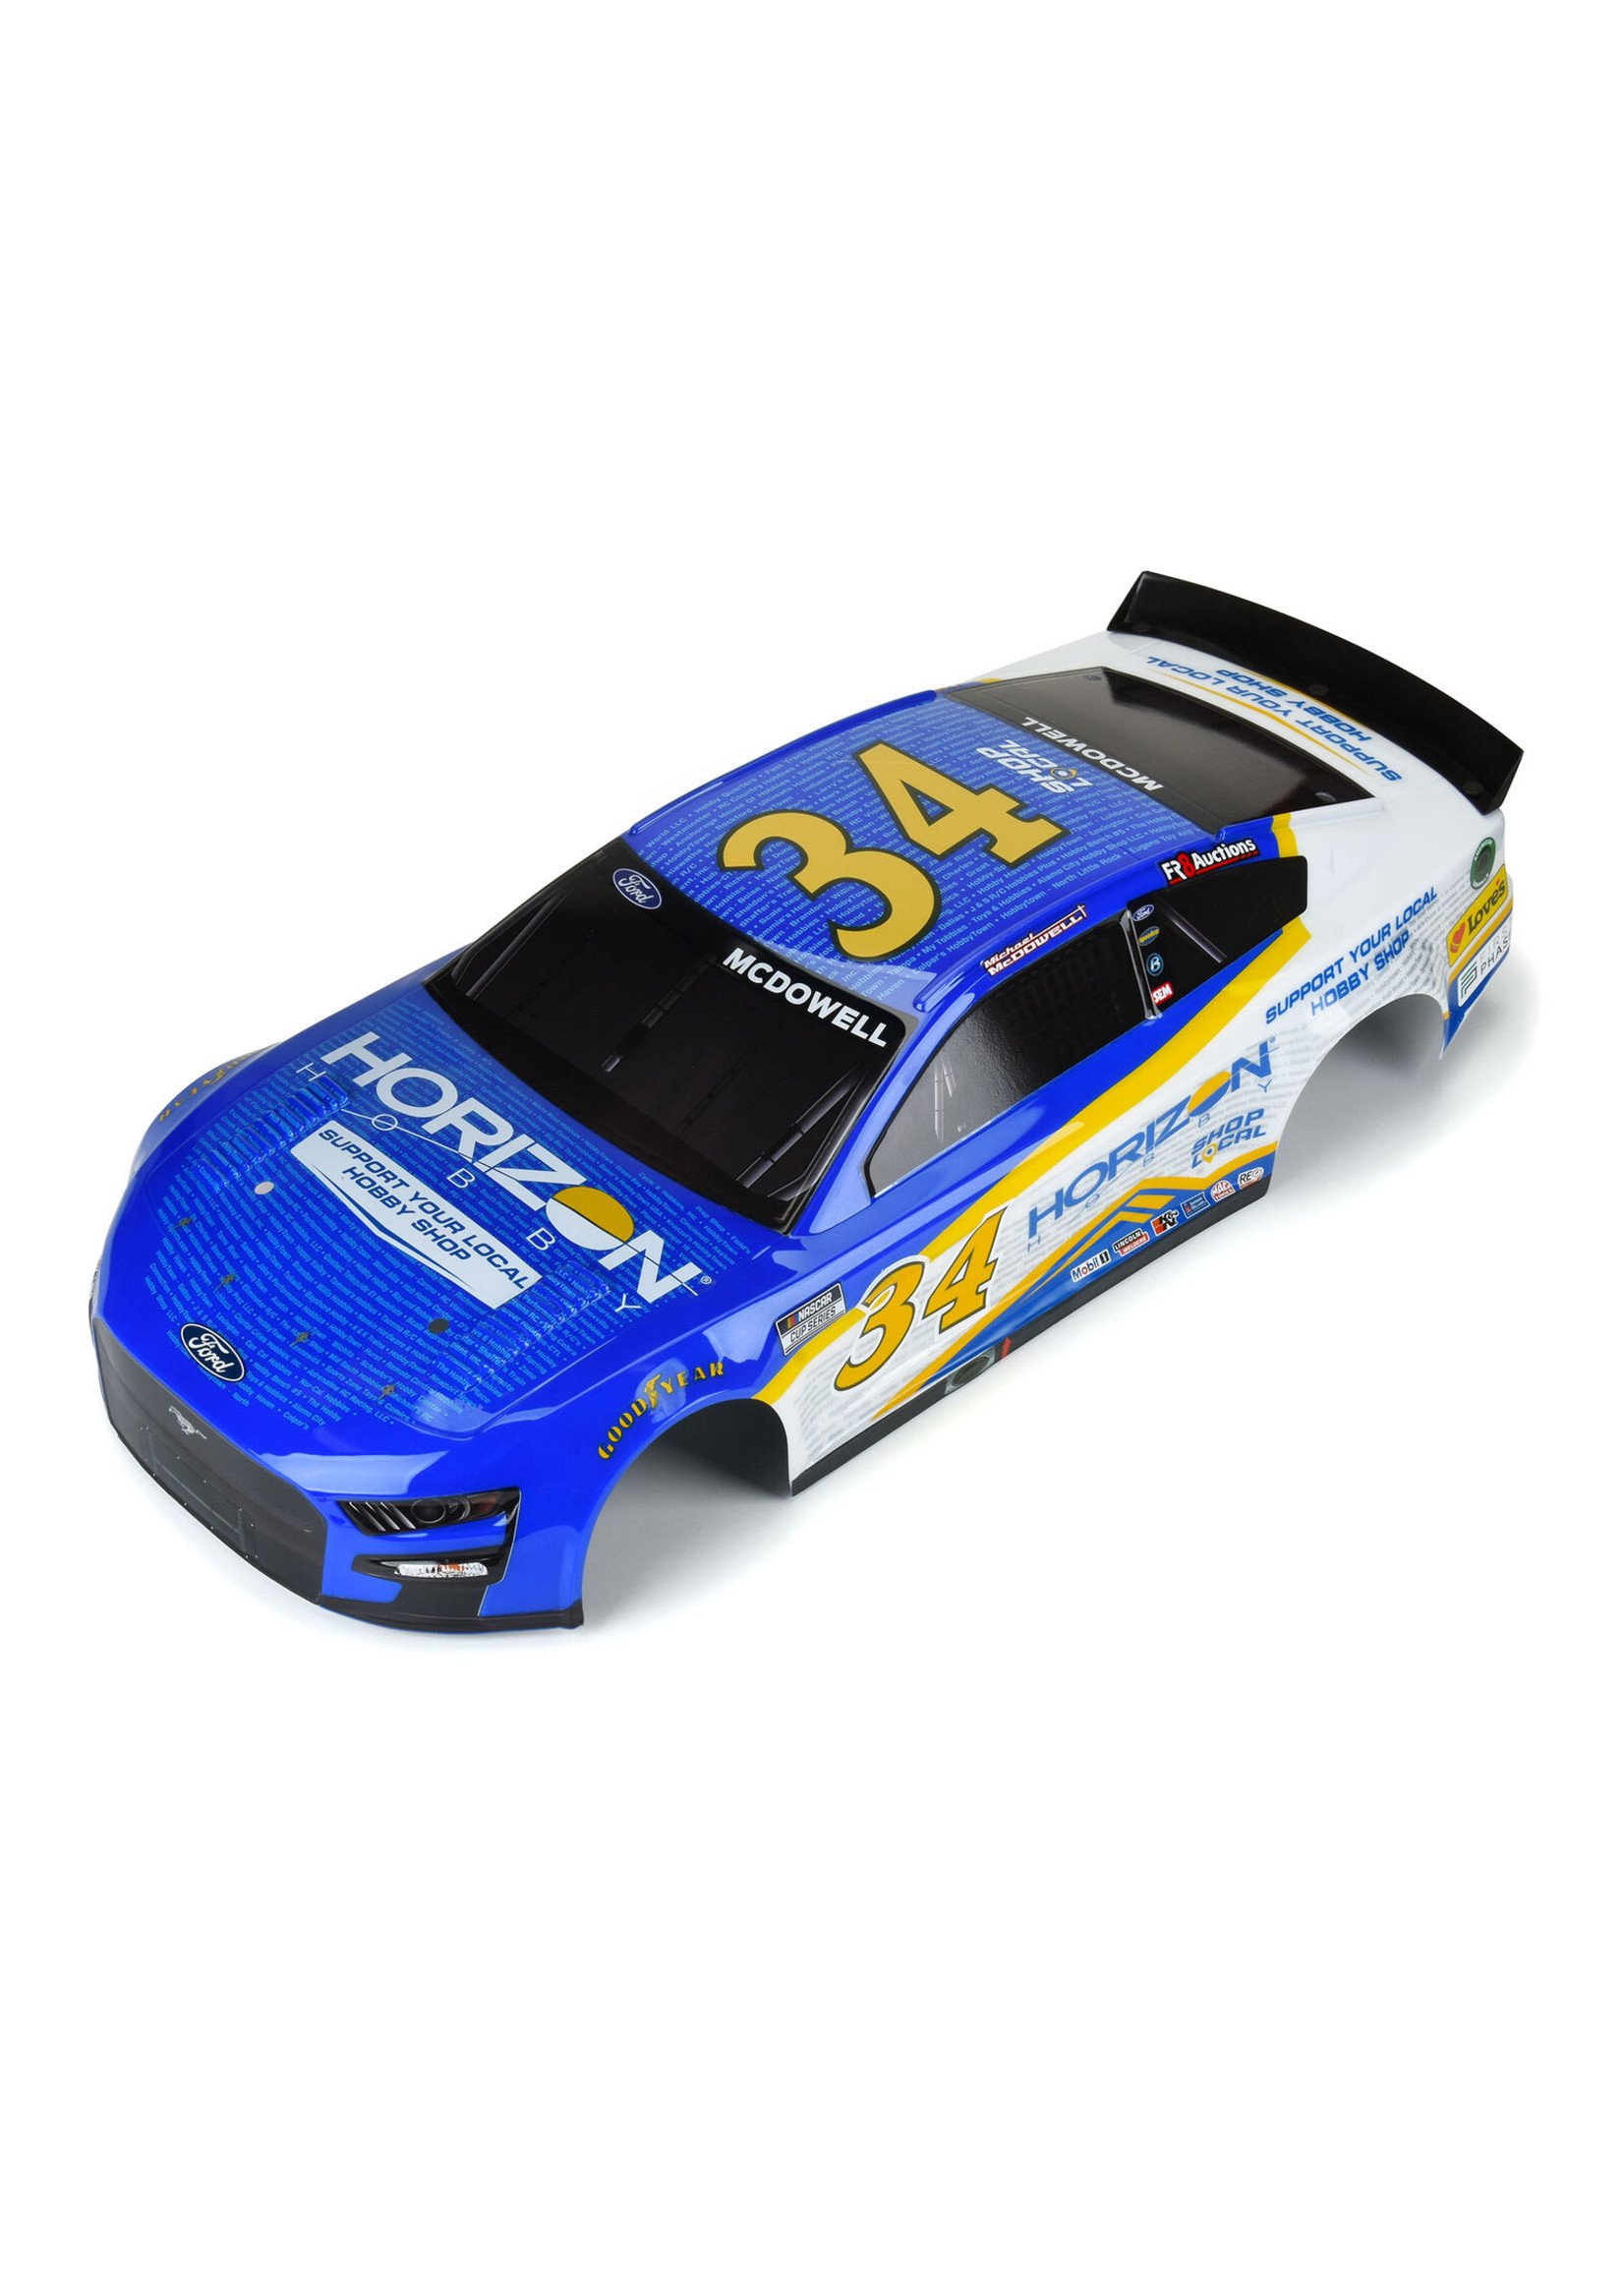 Arrma Limited Edition No. 34 Ford Mustang Nascar Body - Infraction 6S